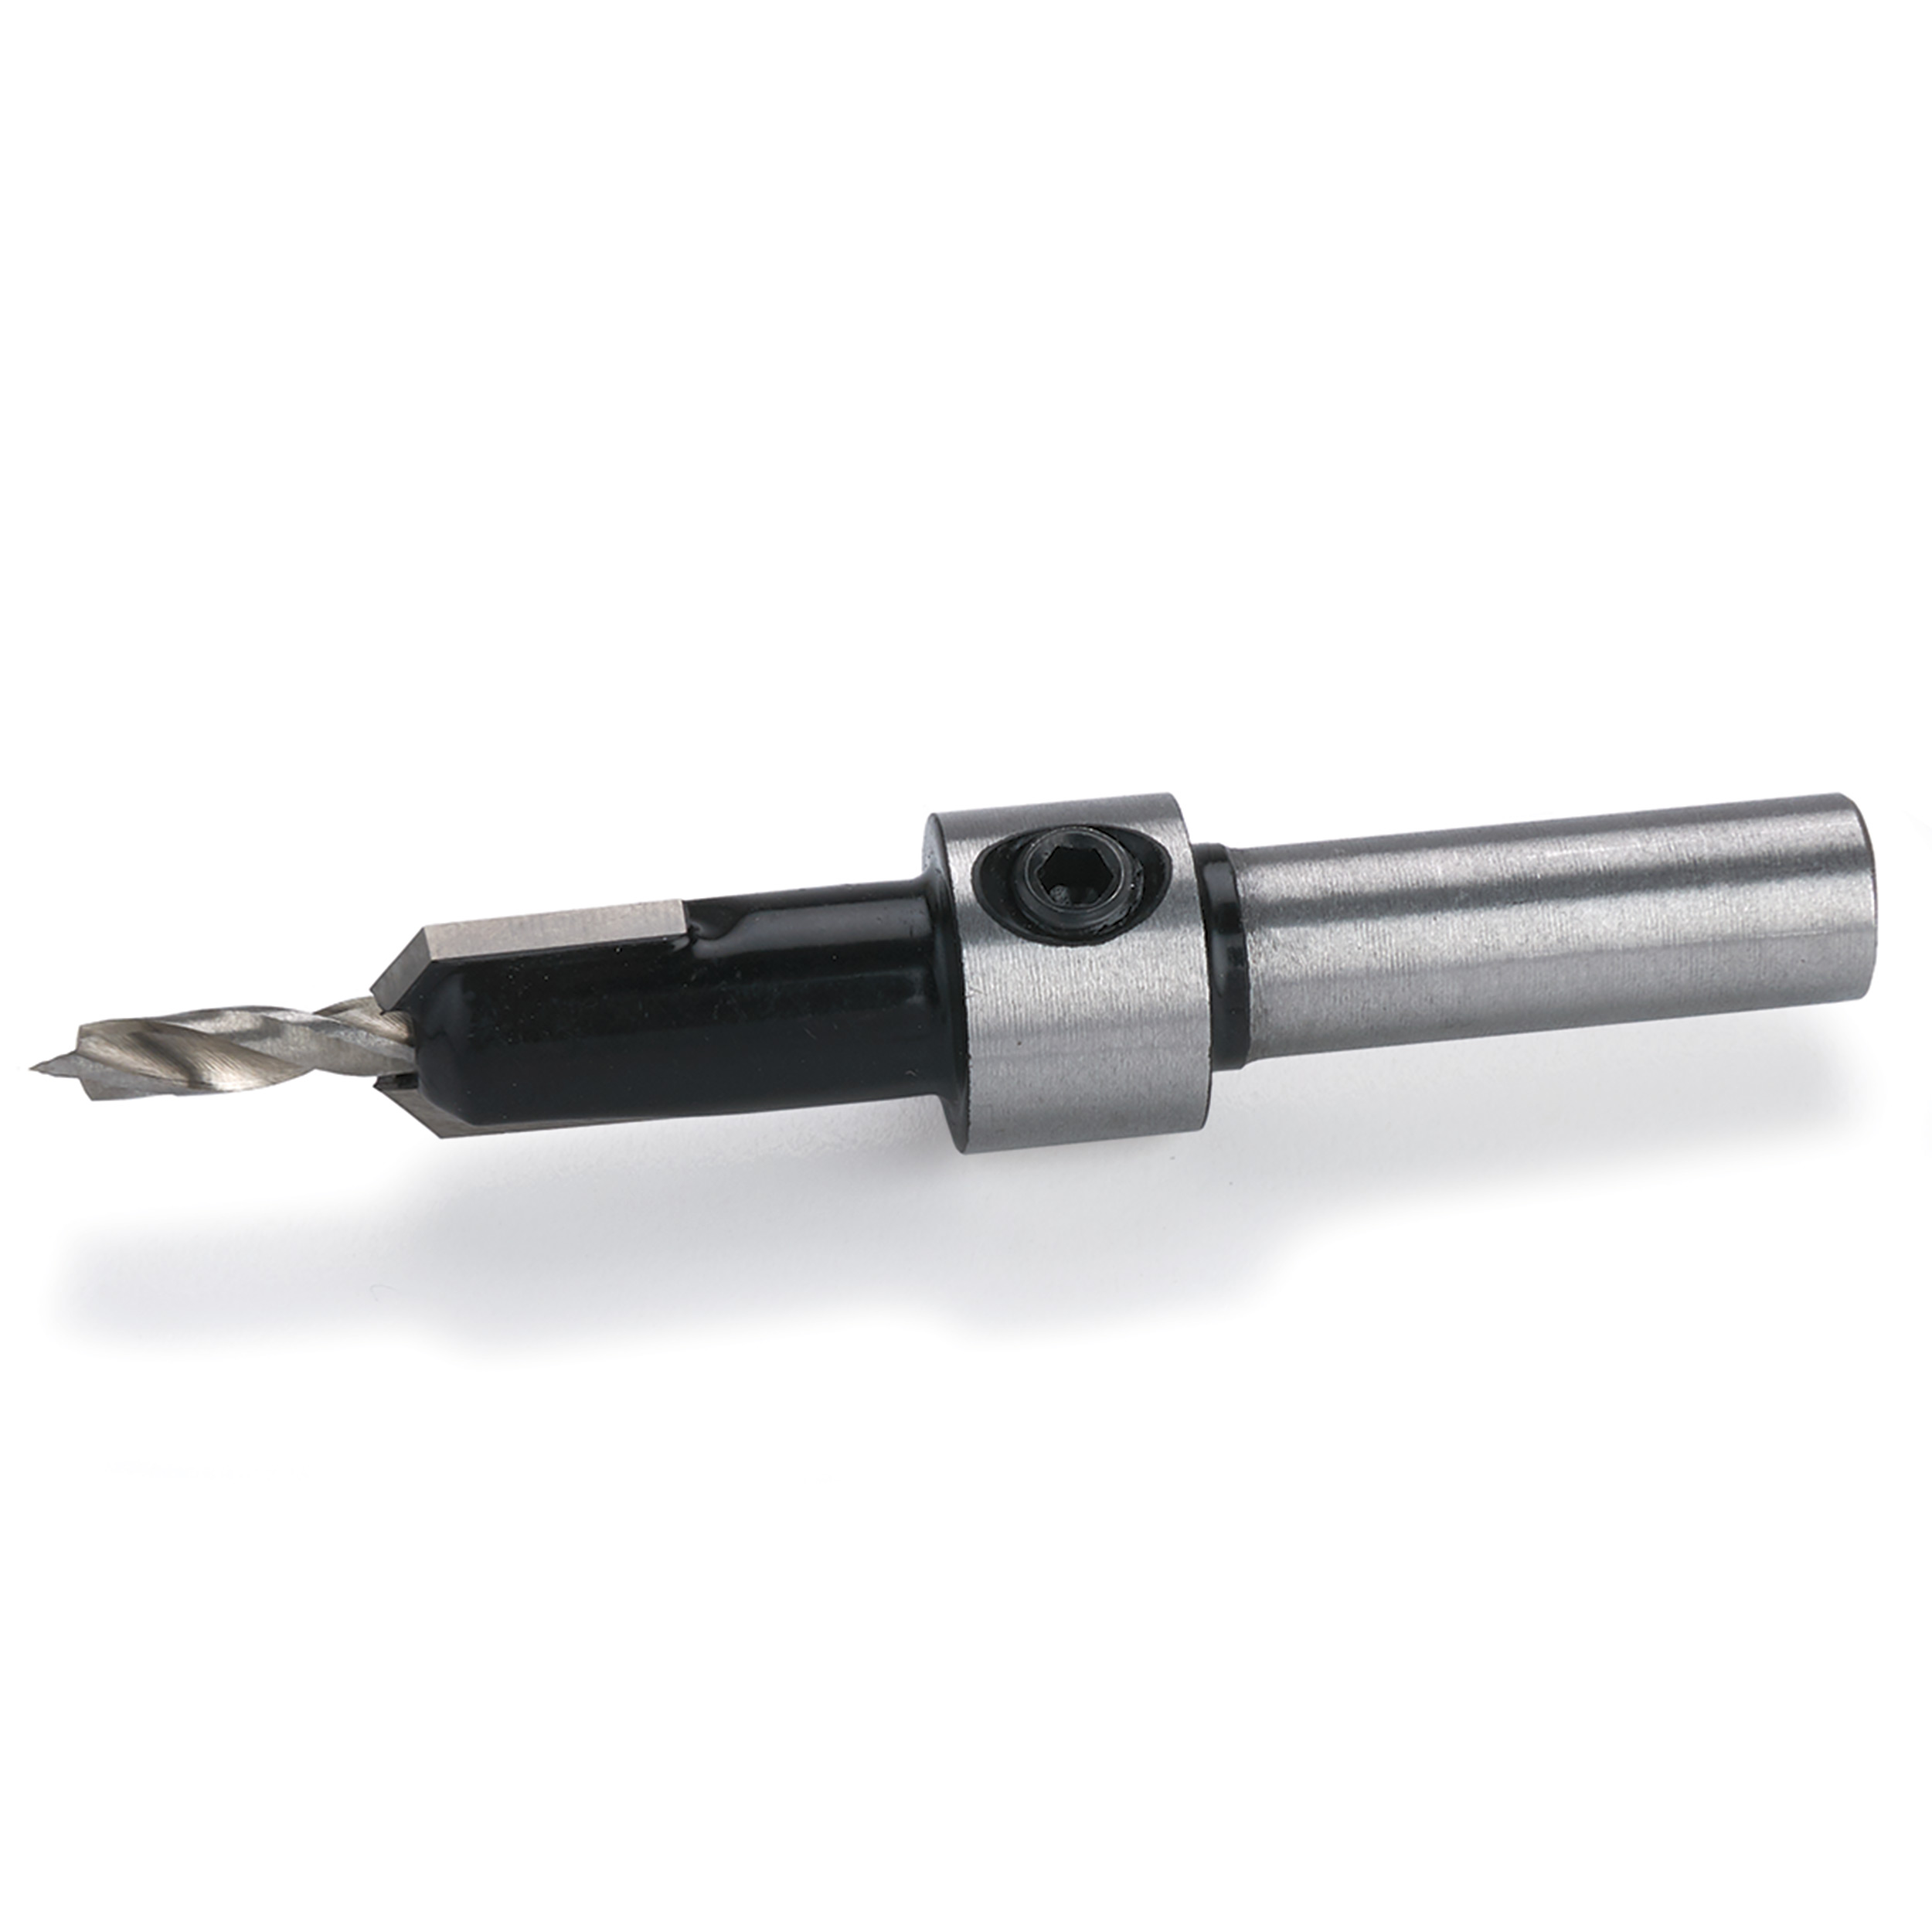 1/8" X 3/8" Carbide-tipped Countersink Set With Brad Point Pilot